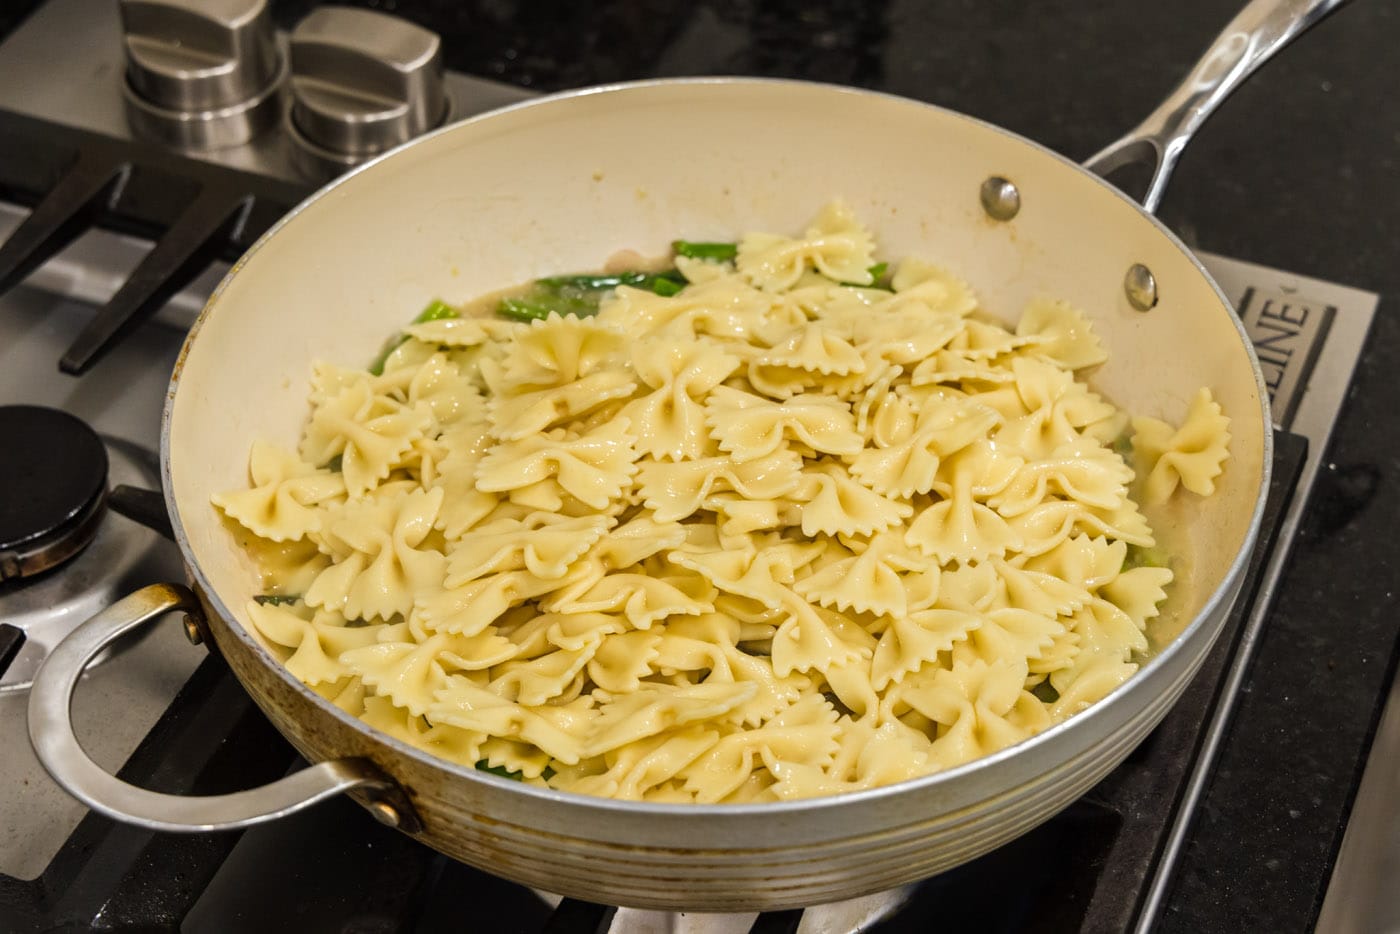 bowtie pasta added to buttered asparagus sauce